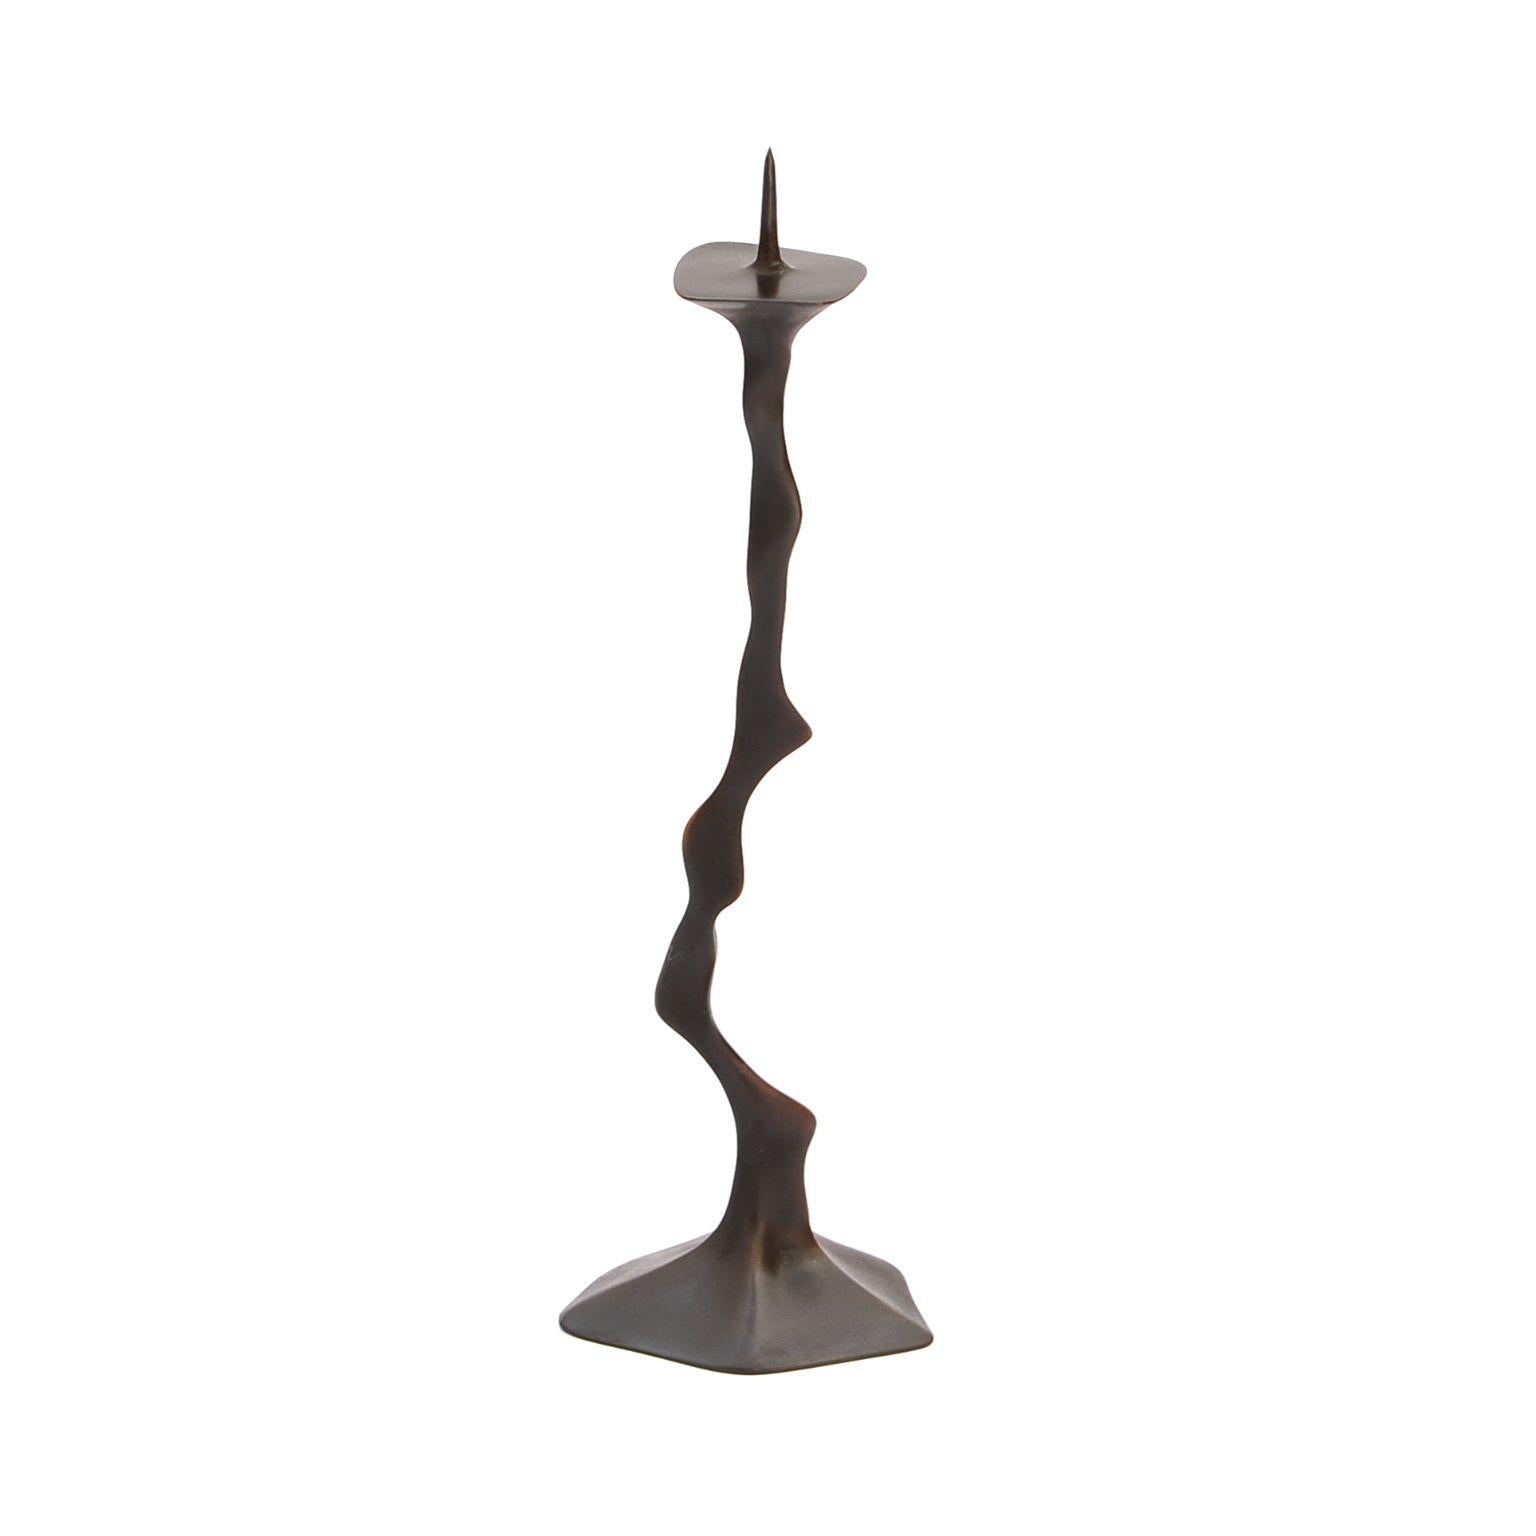 Debbie candlestick by Fakasaka Design
Dimensions: W 6 cm D 5 cm H 24 cm each.
Materials: dark bronze.
Also available in polished bronze.

 FAKASAKA is a design company focused on production of high-end furniture, lighting, decorative objects,